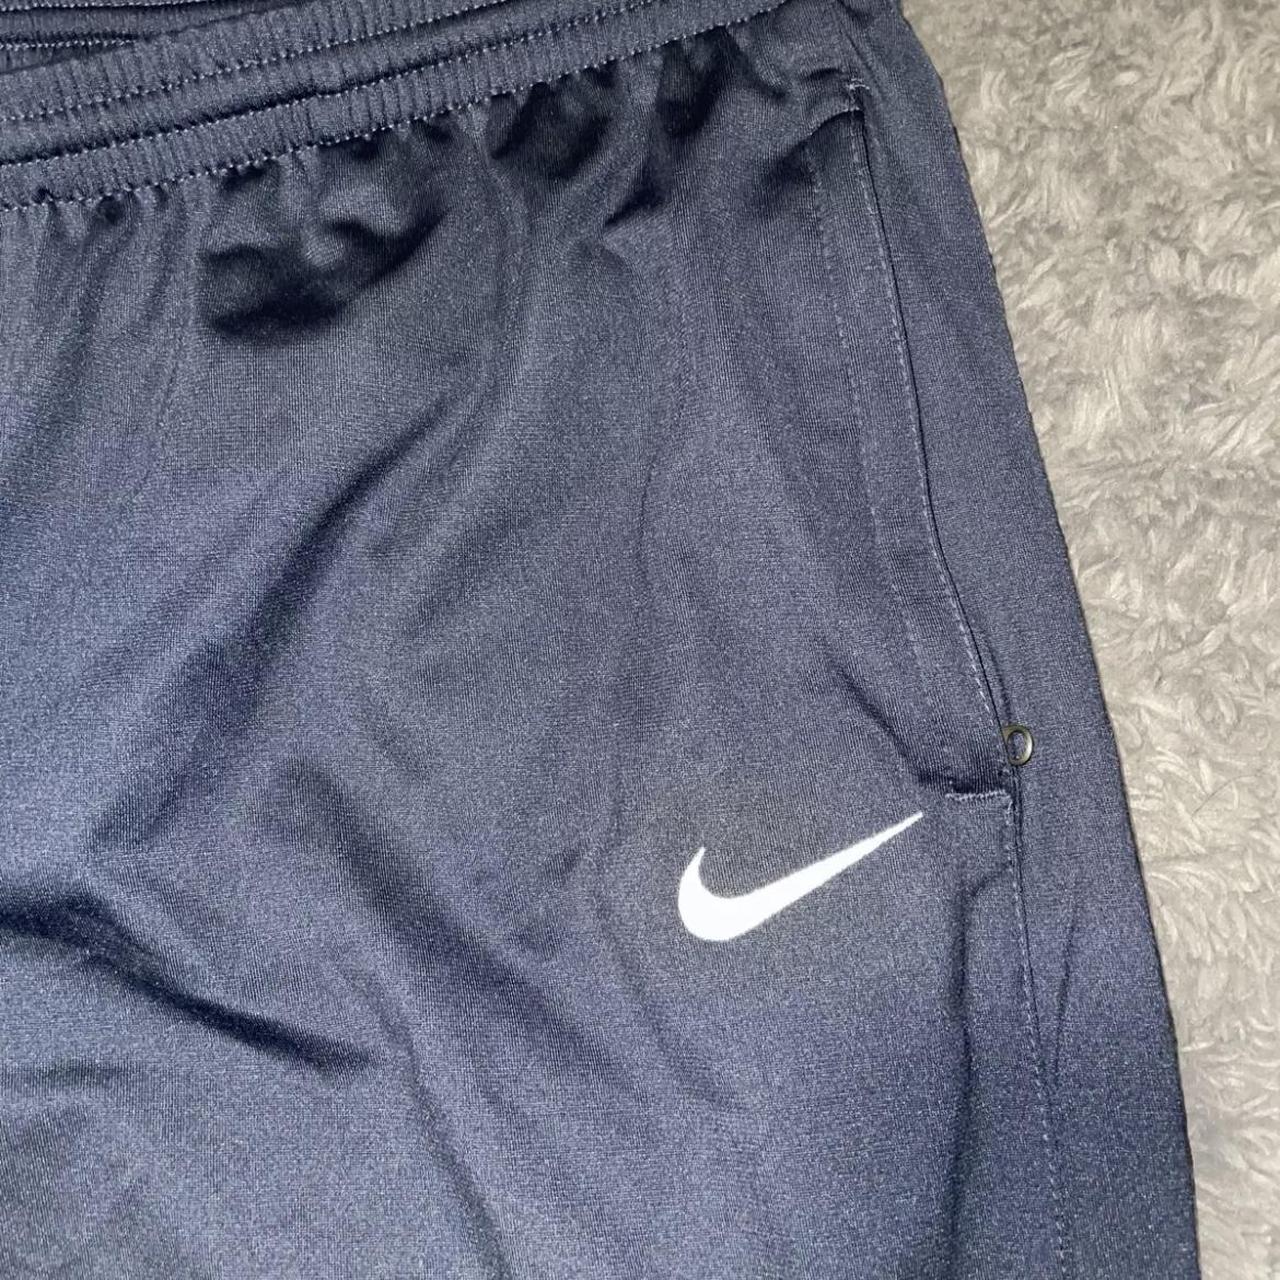 Nike flare joggers Stitched Nike Embroidery down - Depop